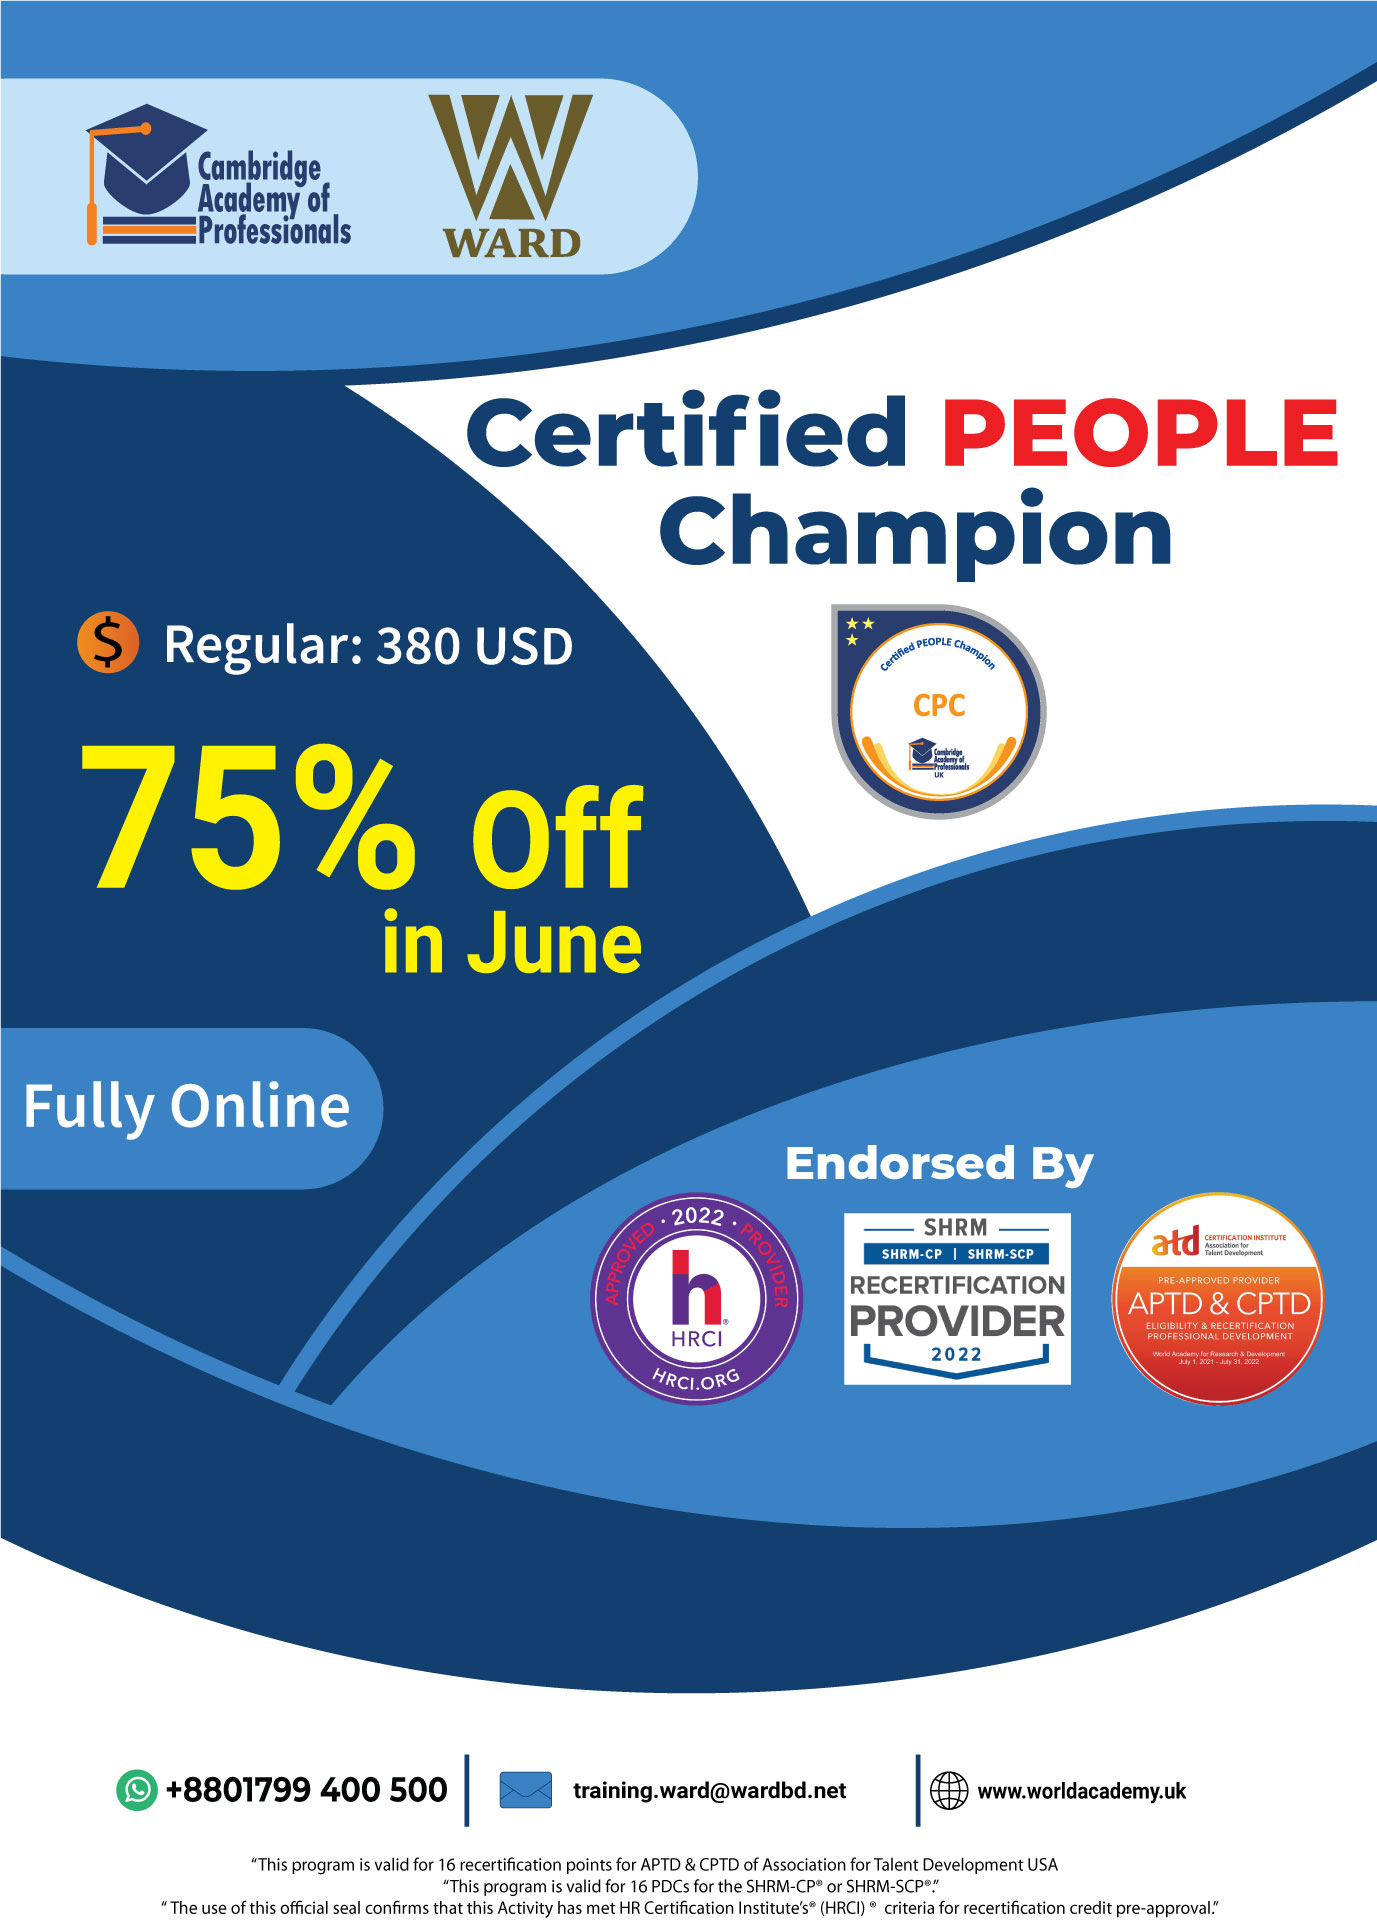 Certified PEOPLE Champion [CPC]